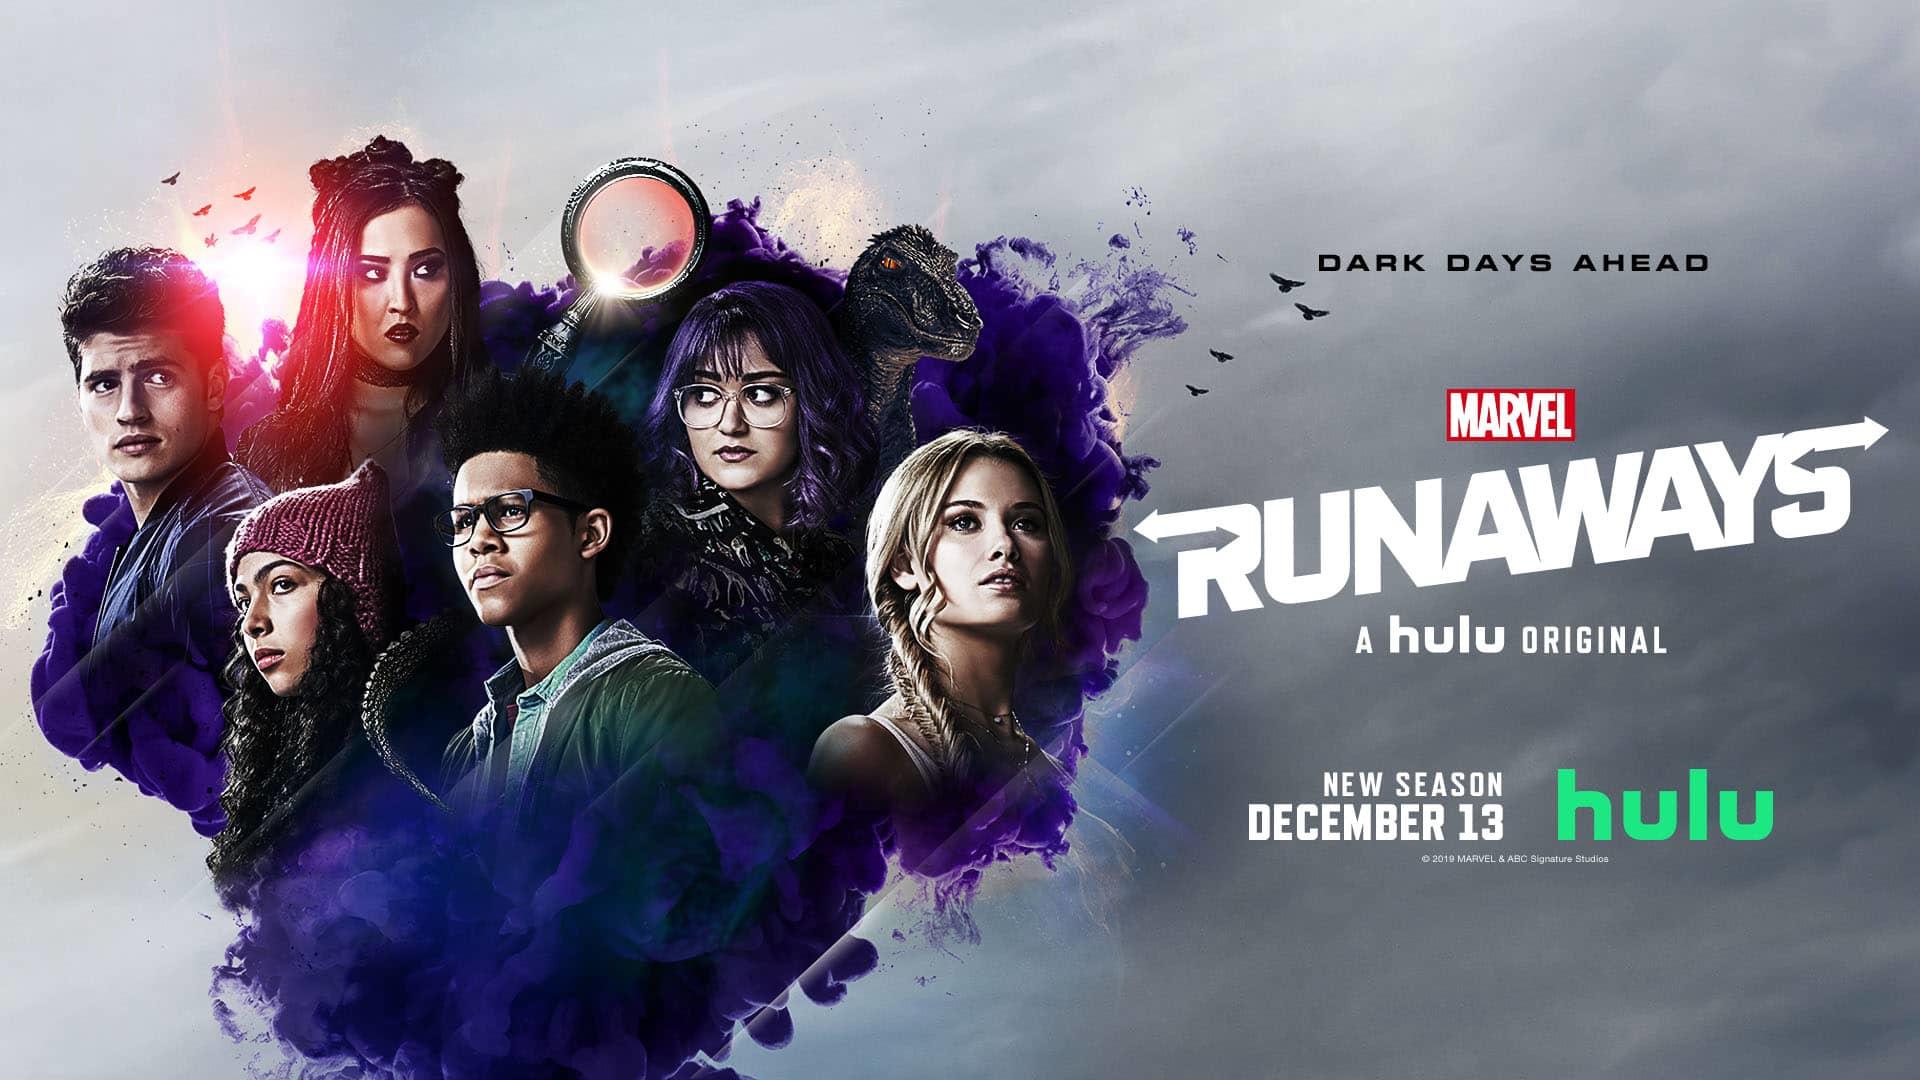 Marvel's Runaways' Showrunners On What's To Come in Third Season